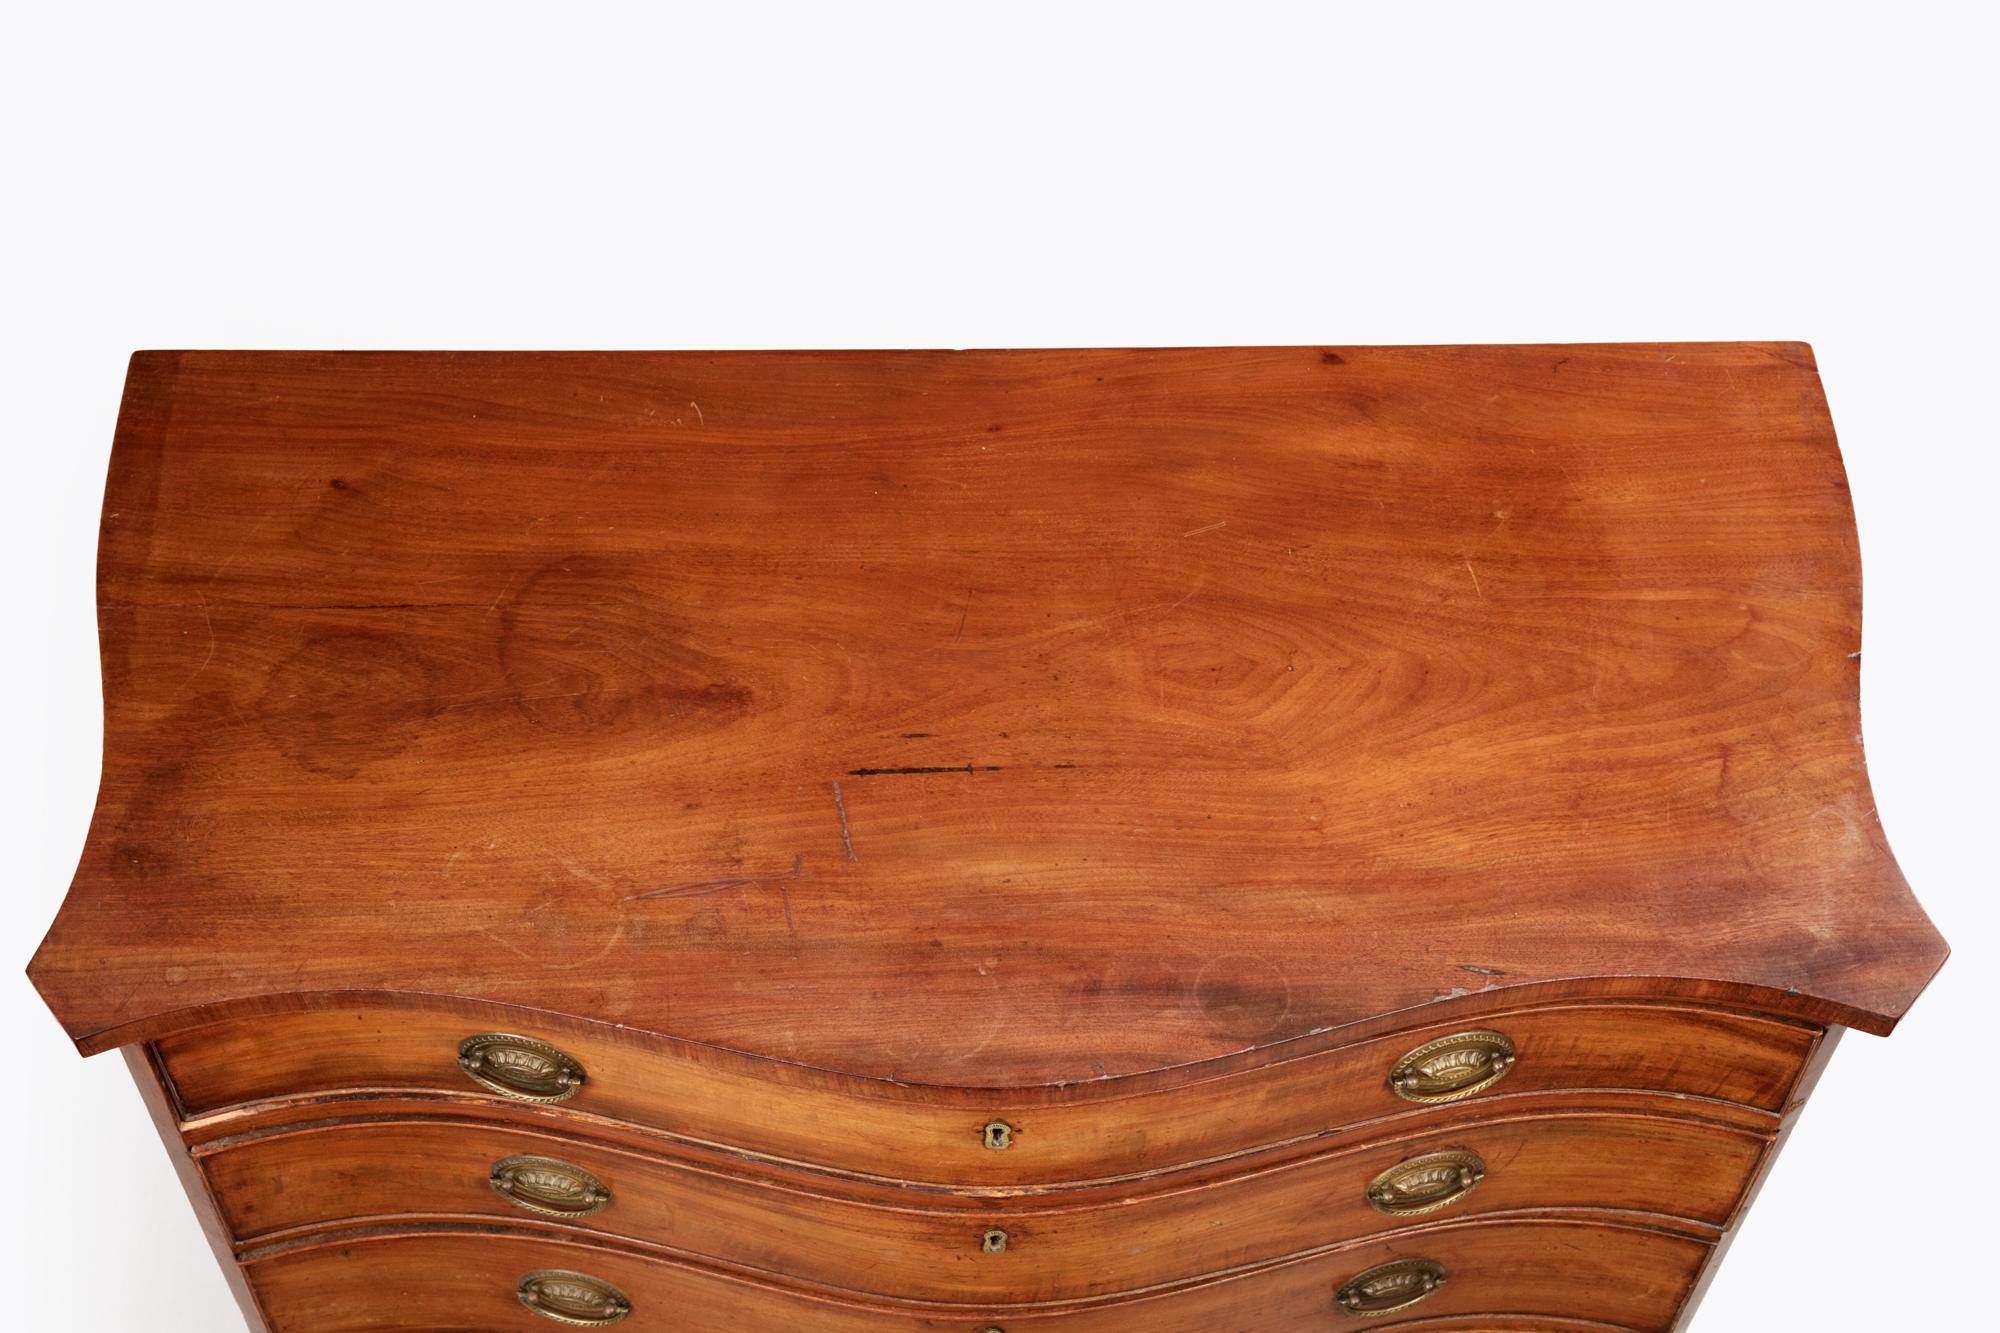 Mid-late 18th Century Georgian serpentine chest with brass locks and oval-shaped pulls on four graduated drawers raised on outswept bracket feet.